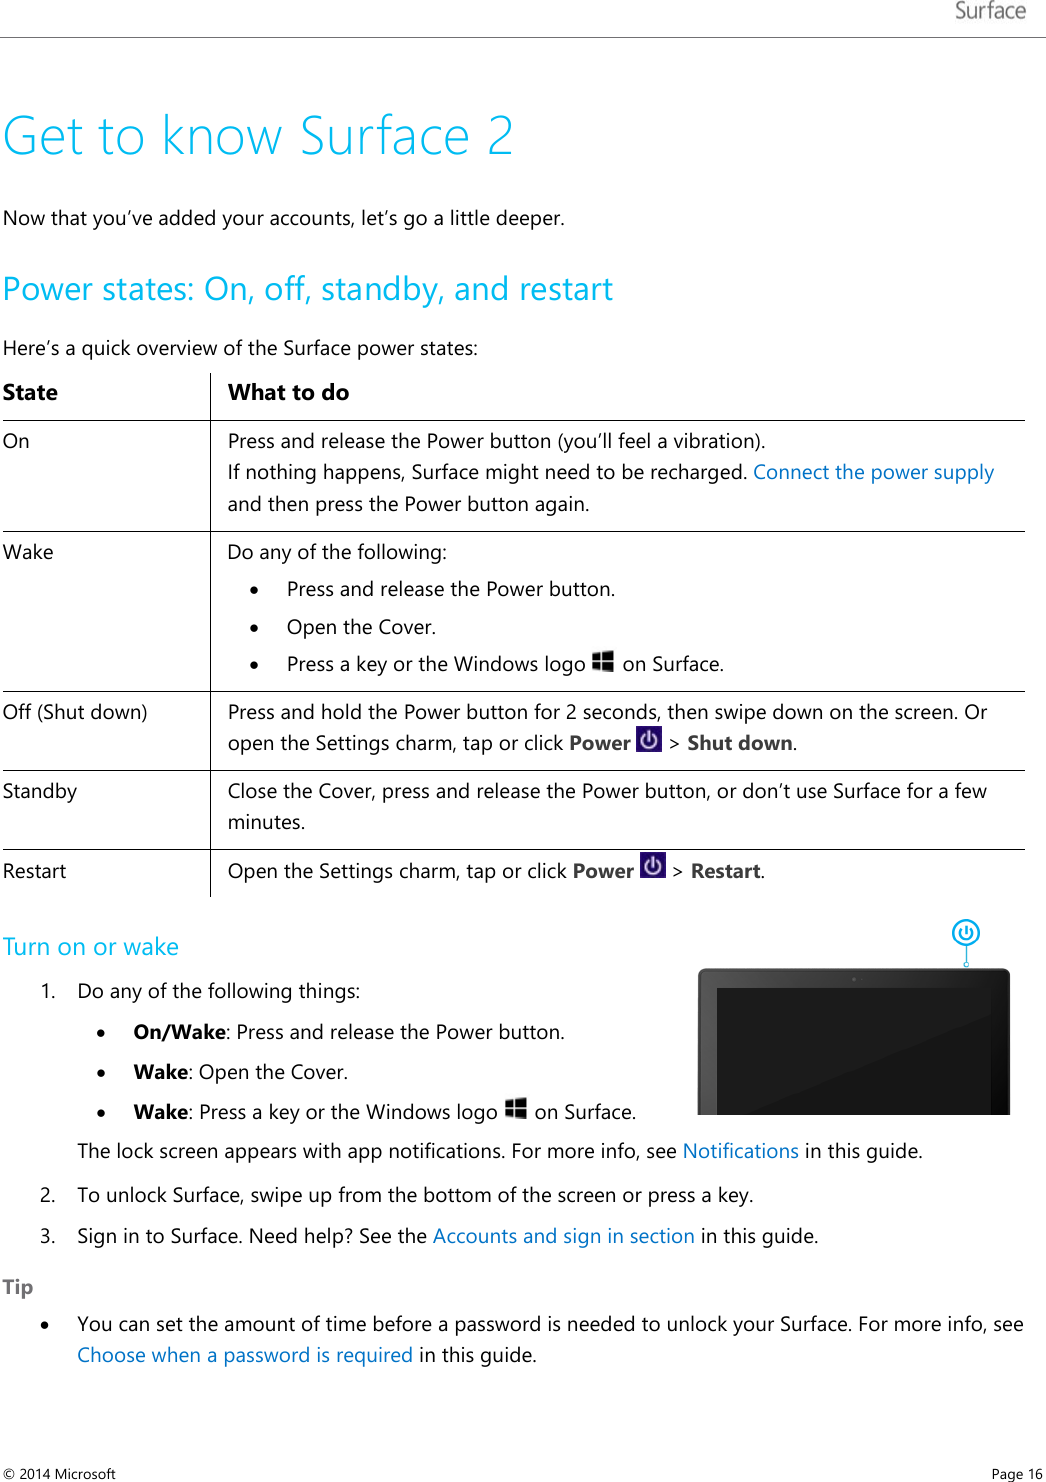   Get to know Surface 2 Now that you’ve added your accounts, let’s go a little deeper.  Power states: On, off, standby, and restart Here’s a quick overview of the Surface power states:  State What to do On   Press and release the Power button (you’ll feel a vibration).  If nothing happens, Surface might need to be recharged. Connect the power supply and then press the Power button again. Wake Do any of the following: • Press and release the Power button. • Open the Cover.  • Press a key or the Windows logo   on Surface.  Off (Shut down) Press and hold the Power button for 2 seconds, then swipe down on the screen. Or open the Settings charm, tap or click Power   &gt; Shut down.  Standby Close the Cover, press and release the Power button, or don’t use Surface for a few minutes. Restart   Open the Settings charm, tap or click Power   &gt; Restart. Turn on or wake  1. Do any of the following things: • On/Wake: Press and release the Power button. • Wake: Open the Cover.  • Wake: Press a key or the Windows logo   on Surface.  The lock screen appears with app notifications. For more info, see Notifications in this guide. 2. To unlock Surface, swipe up from the bottom of the screen or press a key.  3. Sign in to Surface. Need help? See the Accounts and sign in section in this guide. Tip • You can set the amount of time before a password is needed to unlock your Surface. For more info, see Choose when a password is required in this guide. © 2014 Microsoft     Page 16  